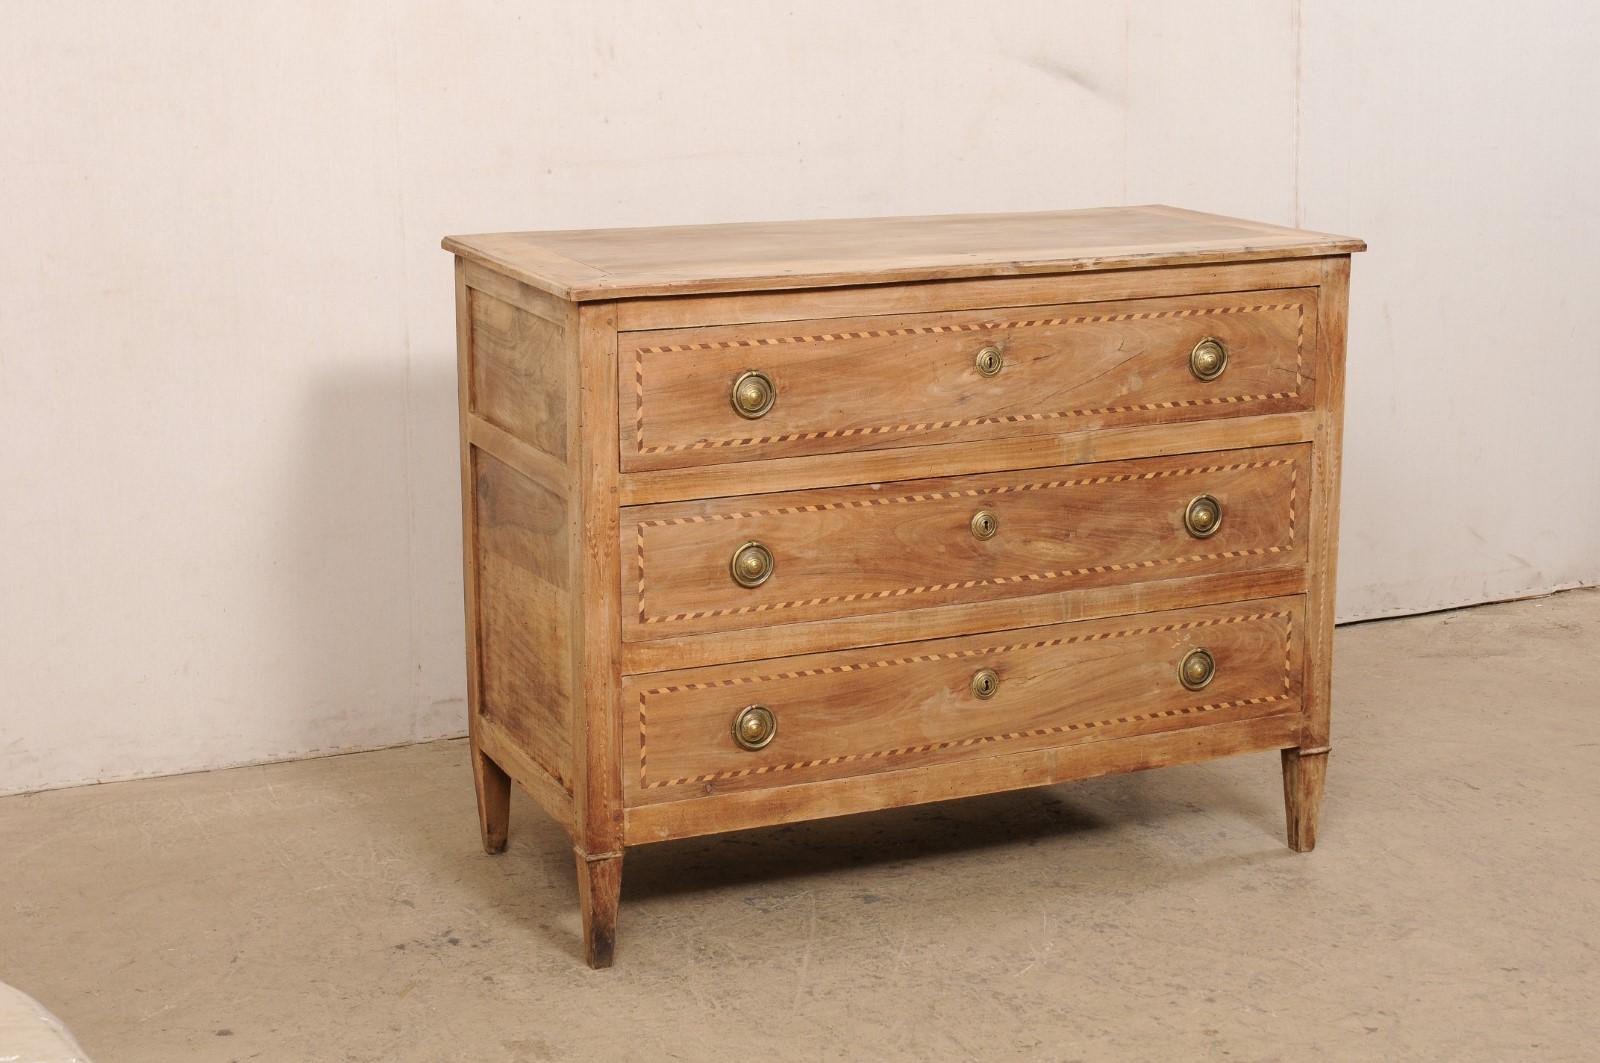 A French walnut commode from the turn of the 18th and 19th century. This antique chest from France houses three dove-tailed and graduated drawers, each nicely outlined with a ribbon style banding inlay and fitted with a pair of brass ring pulls